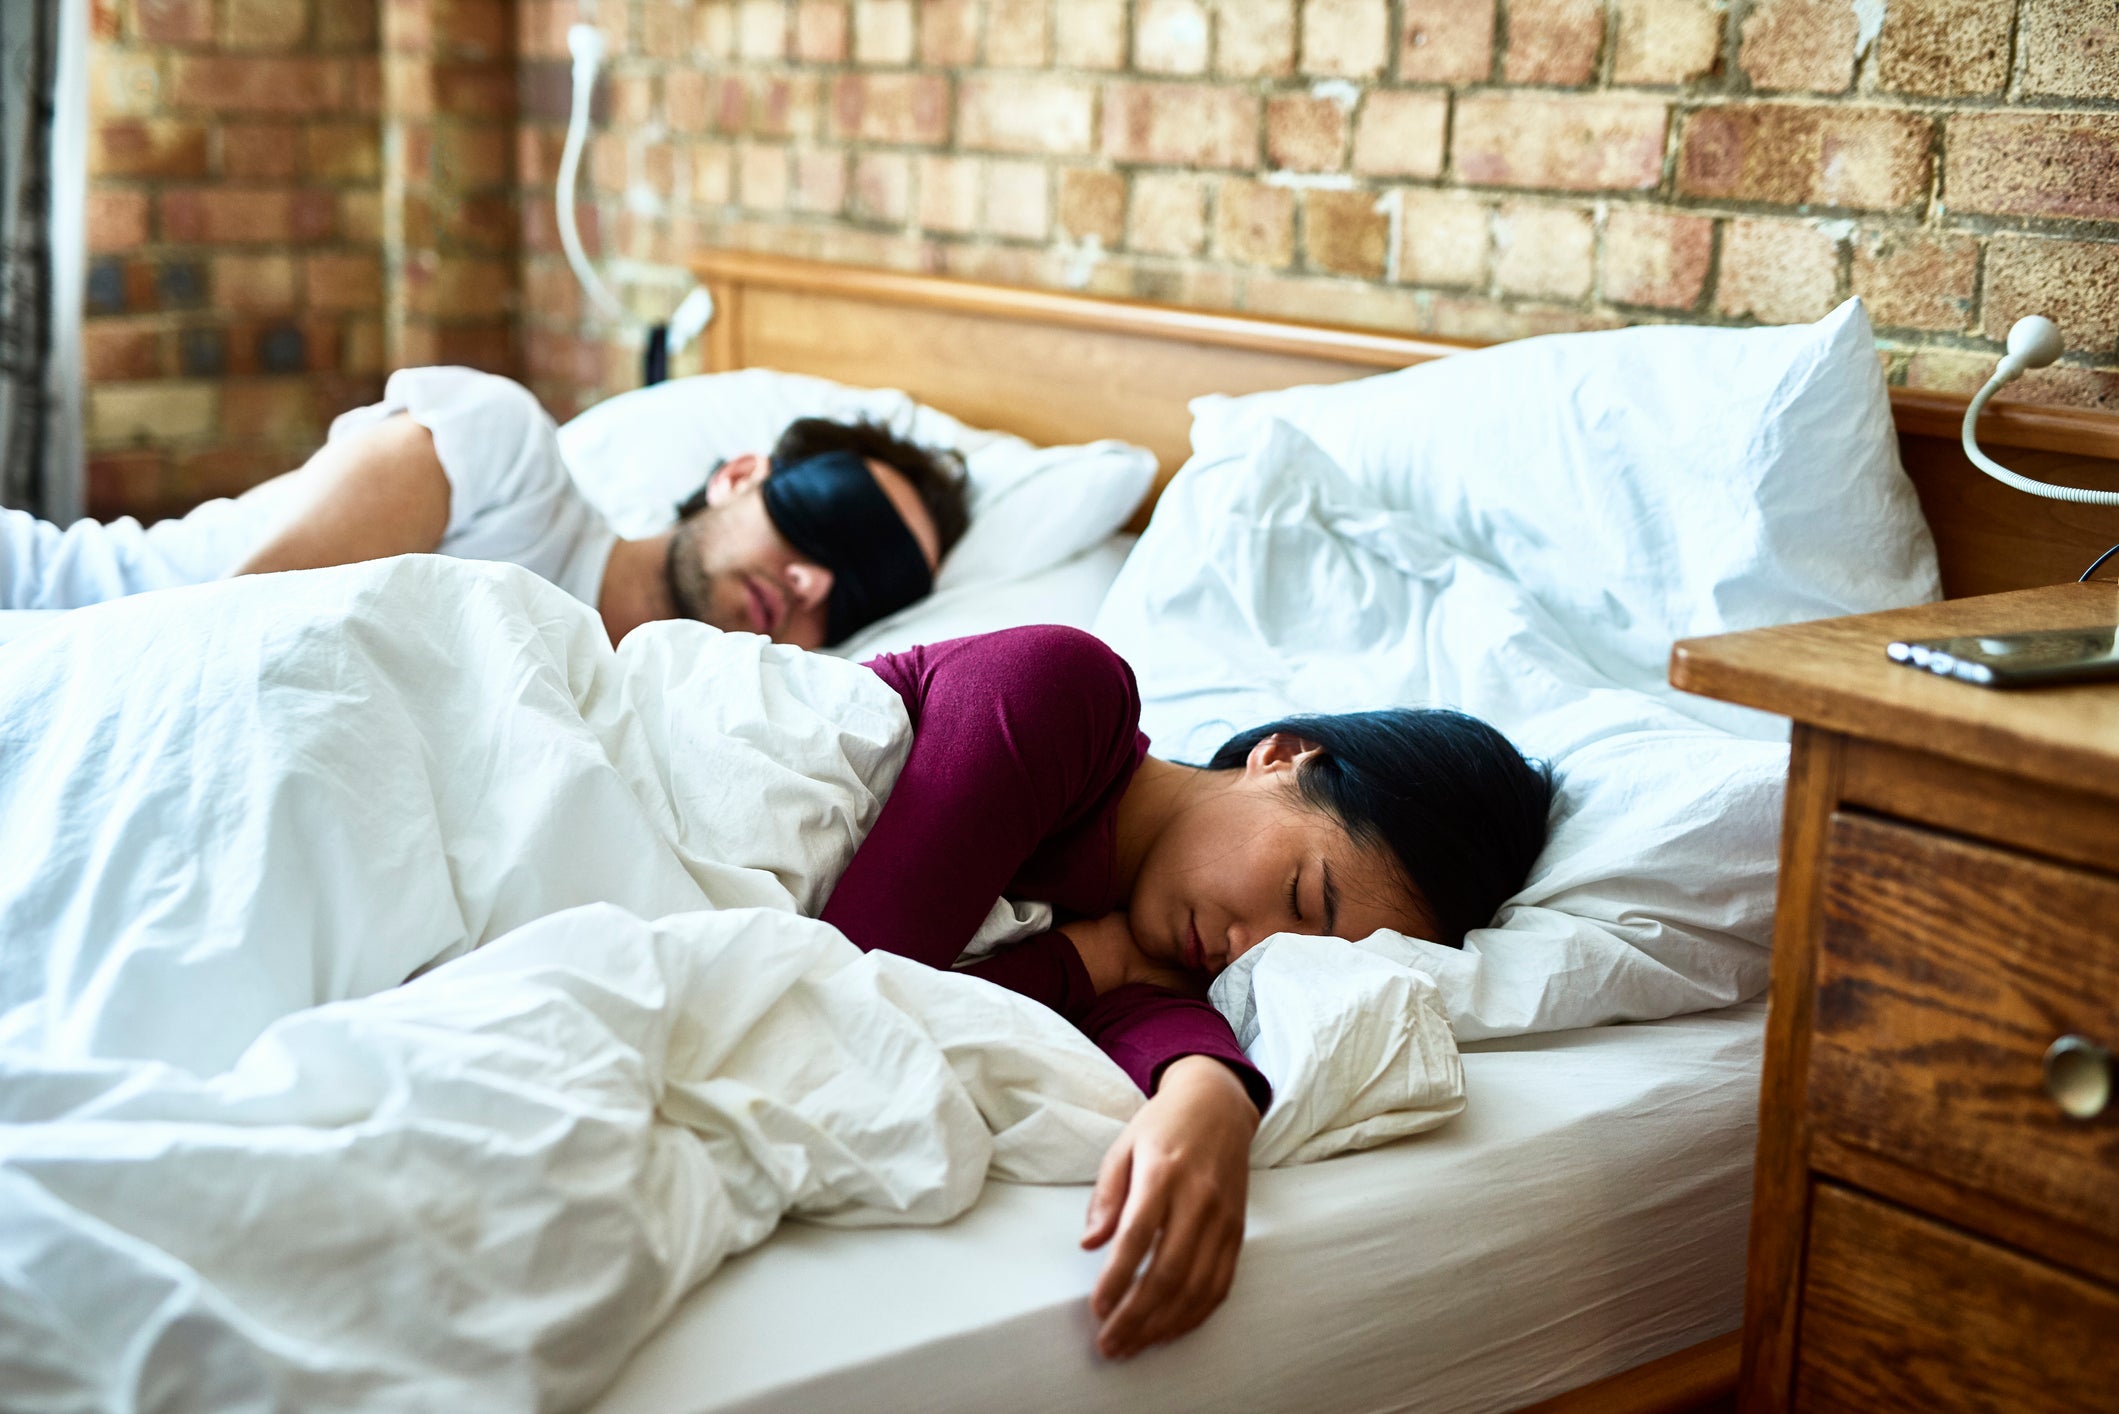 7 Tips for Sharing a Bed and Sleeping Better With a Restless Partner